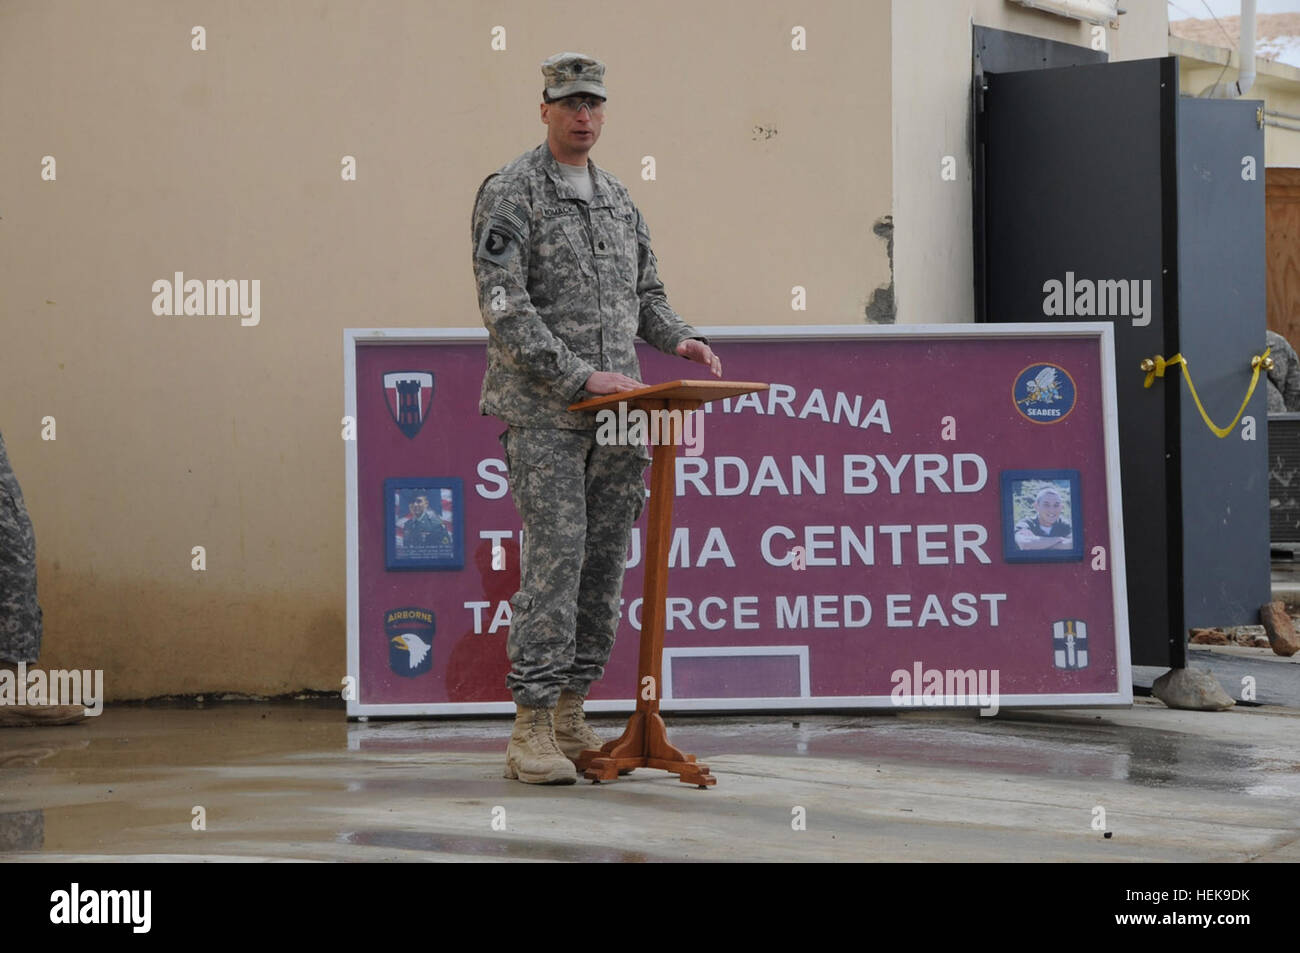 U.S. Army Lt. Col. David Womack, commander of Task Force Red Currahee, 1st Battalion, 506th Infantry Regiment, 4th Brigade Combat Team, 101st Airborne Division, speaks at the opening of the Spc. Jordan Byrd Trauma Center at Forward Operating Base Sharana March 1. The trauma center is named for TF Currahee medic who died in Paktika Province Oct. 13, 2010 while administering life-saving medical treatment to a wounded Soldier while shielding him with his own body from direct fire from insurgents. (Photo by U.S. Army Sgt. Christina Sinders, Task Force Currahee Public Affairs) Trauma center named a Stock Photo